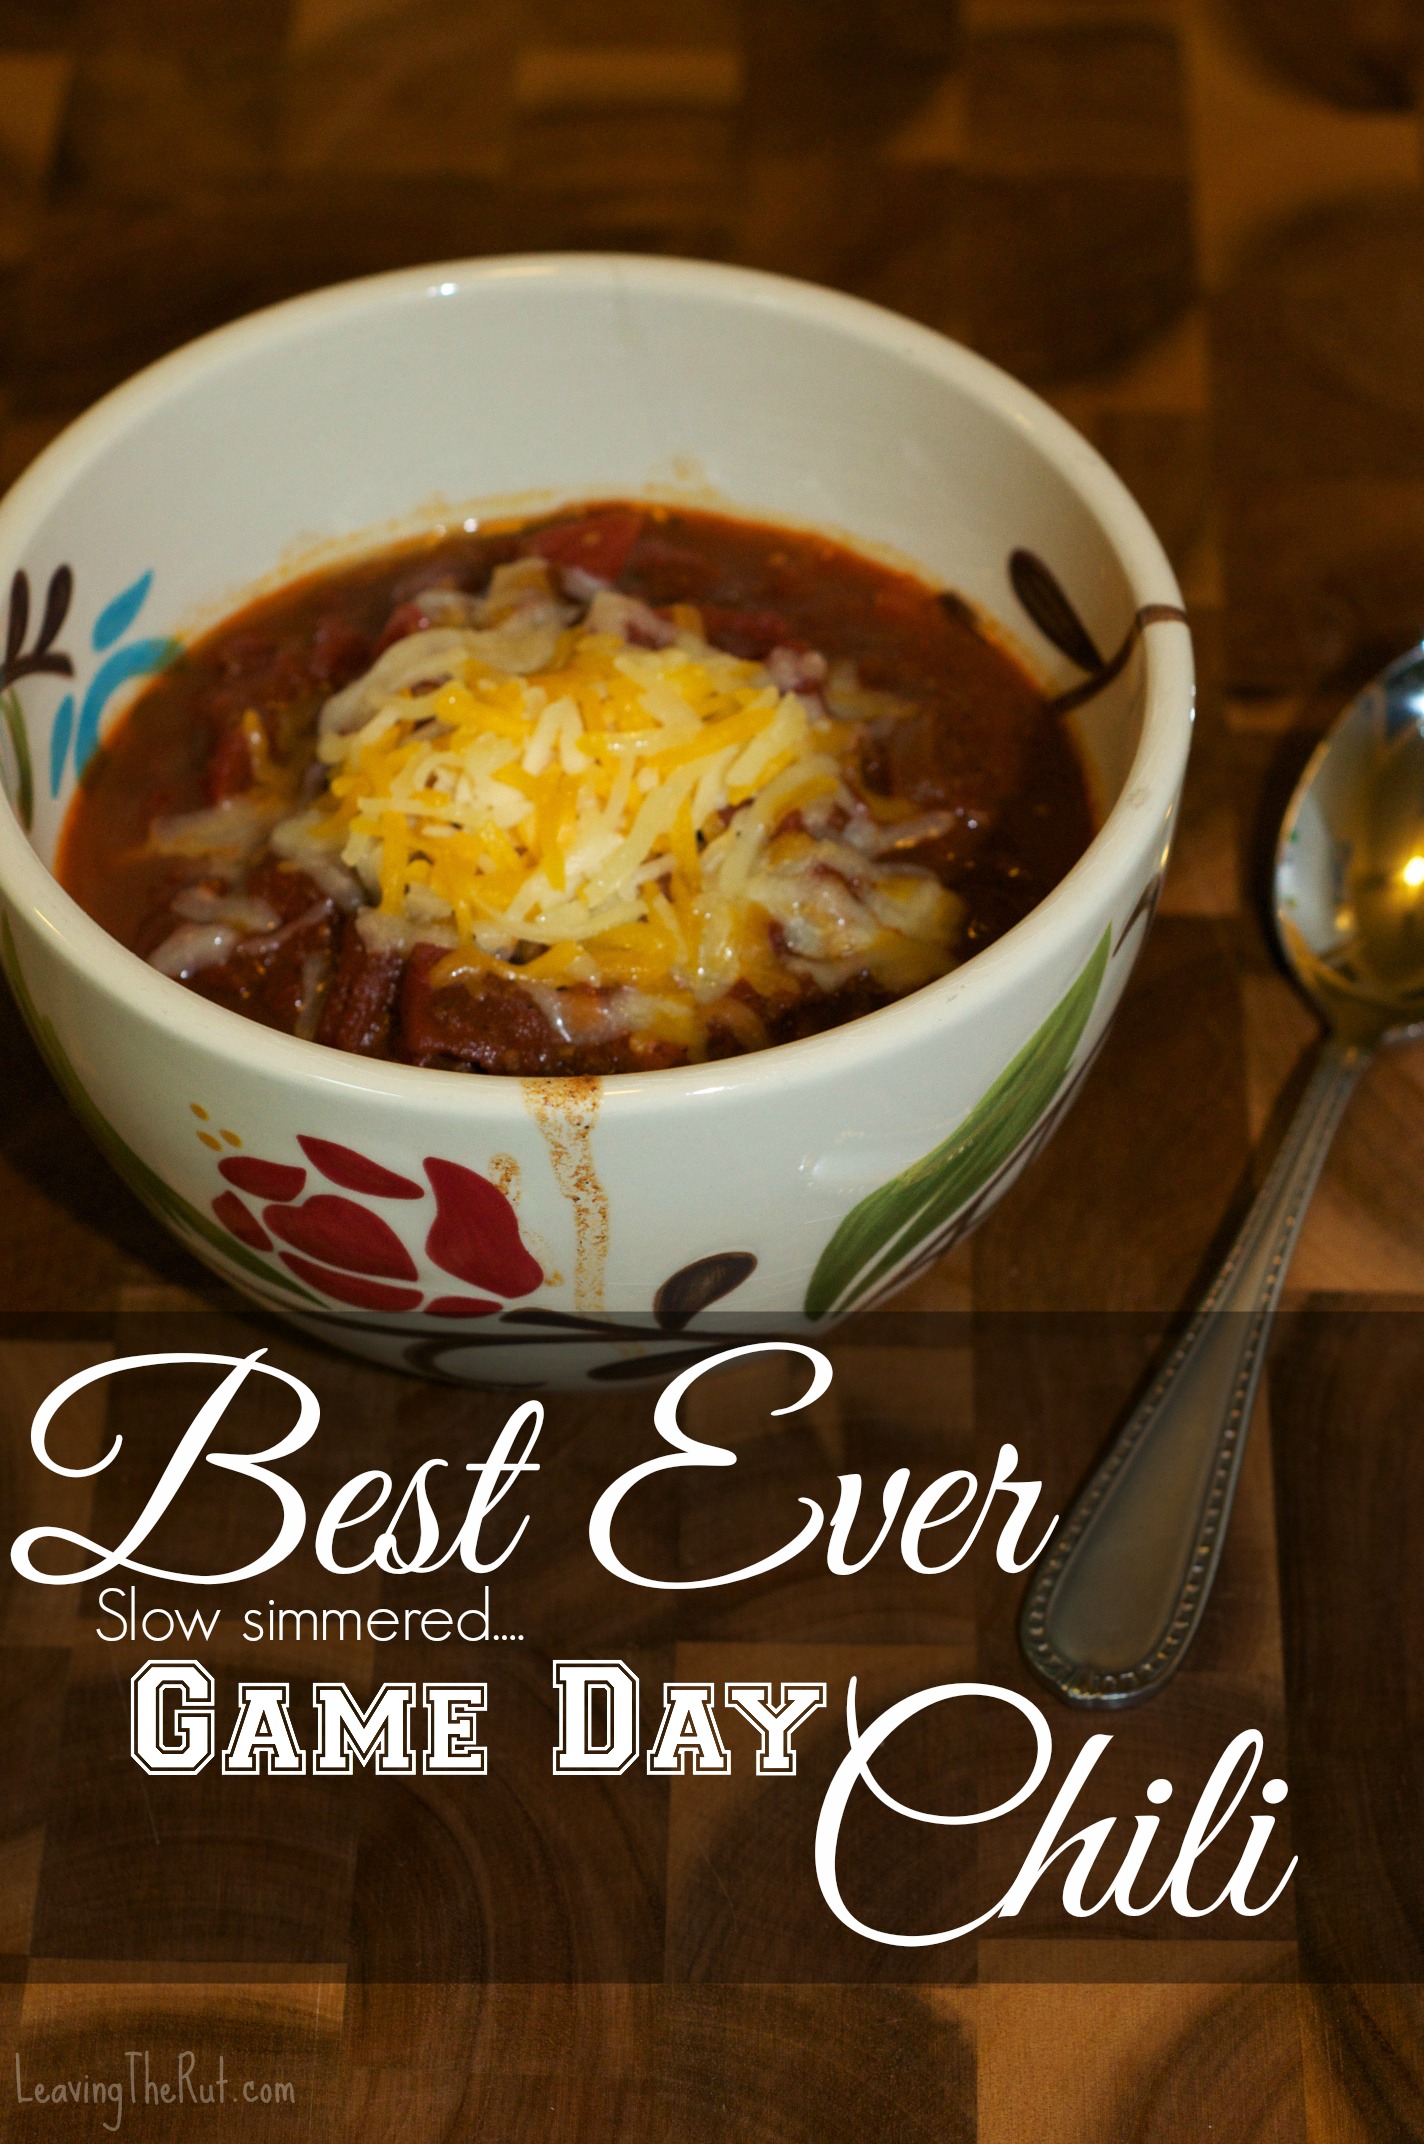 http://leavingtherut.com/wp-content/uploads/2014/11/Best-Ever-Game-Day-Chili-pin2.jpg